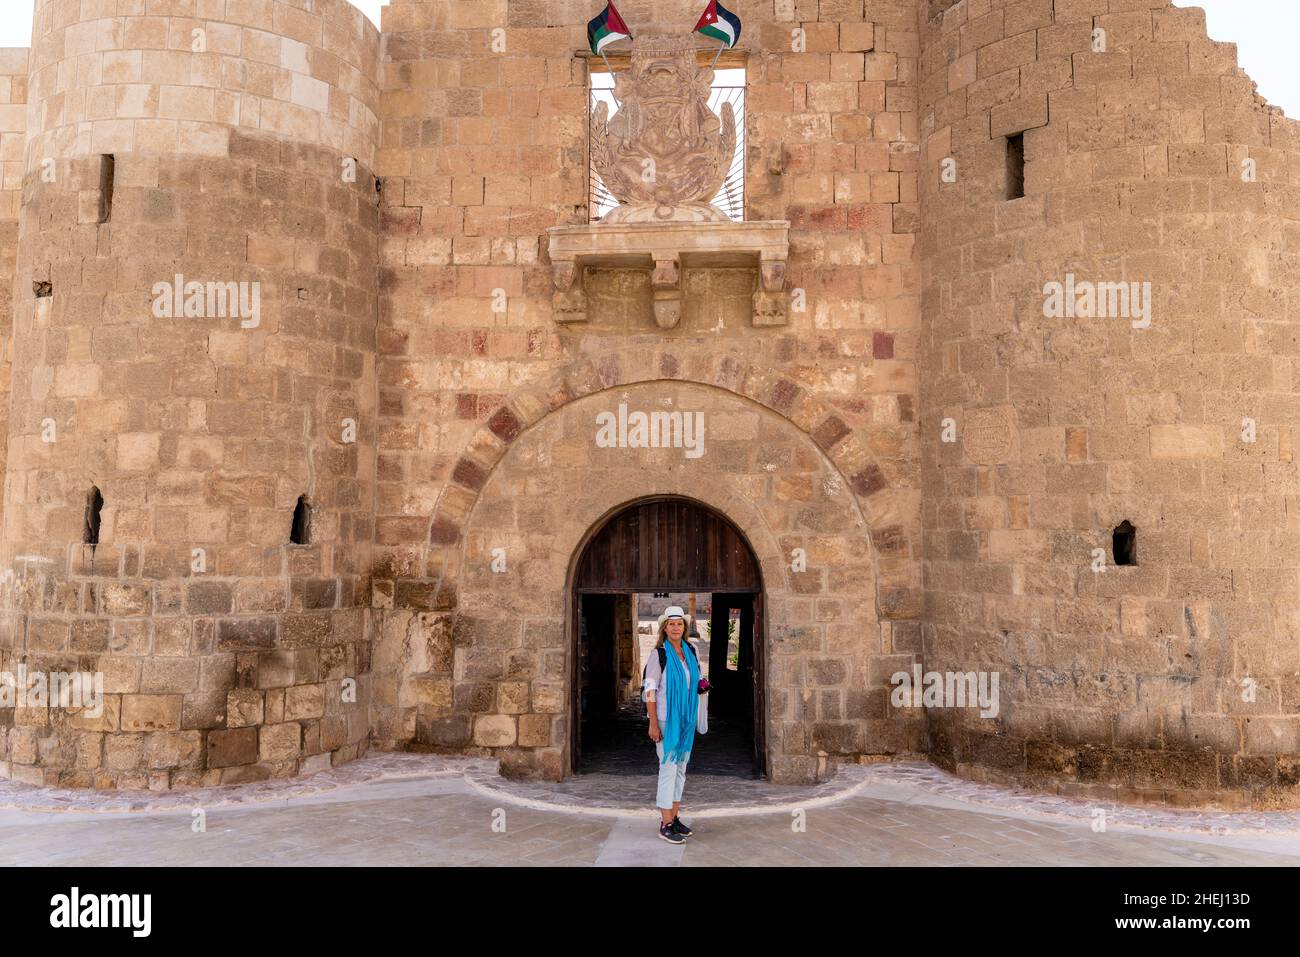 A Female Visitor Poses In Front Of The Aqaba Fort, Aqaba, Aqaba Governorate, Jordan. Stock Photo